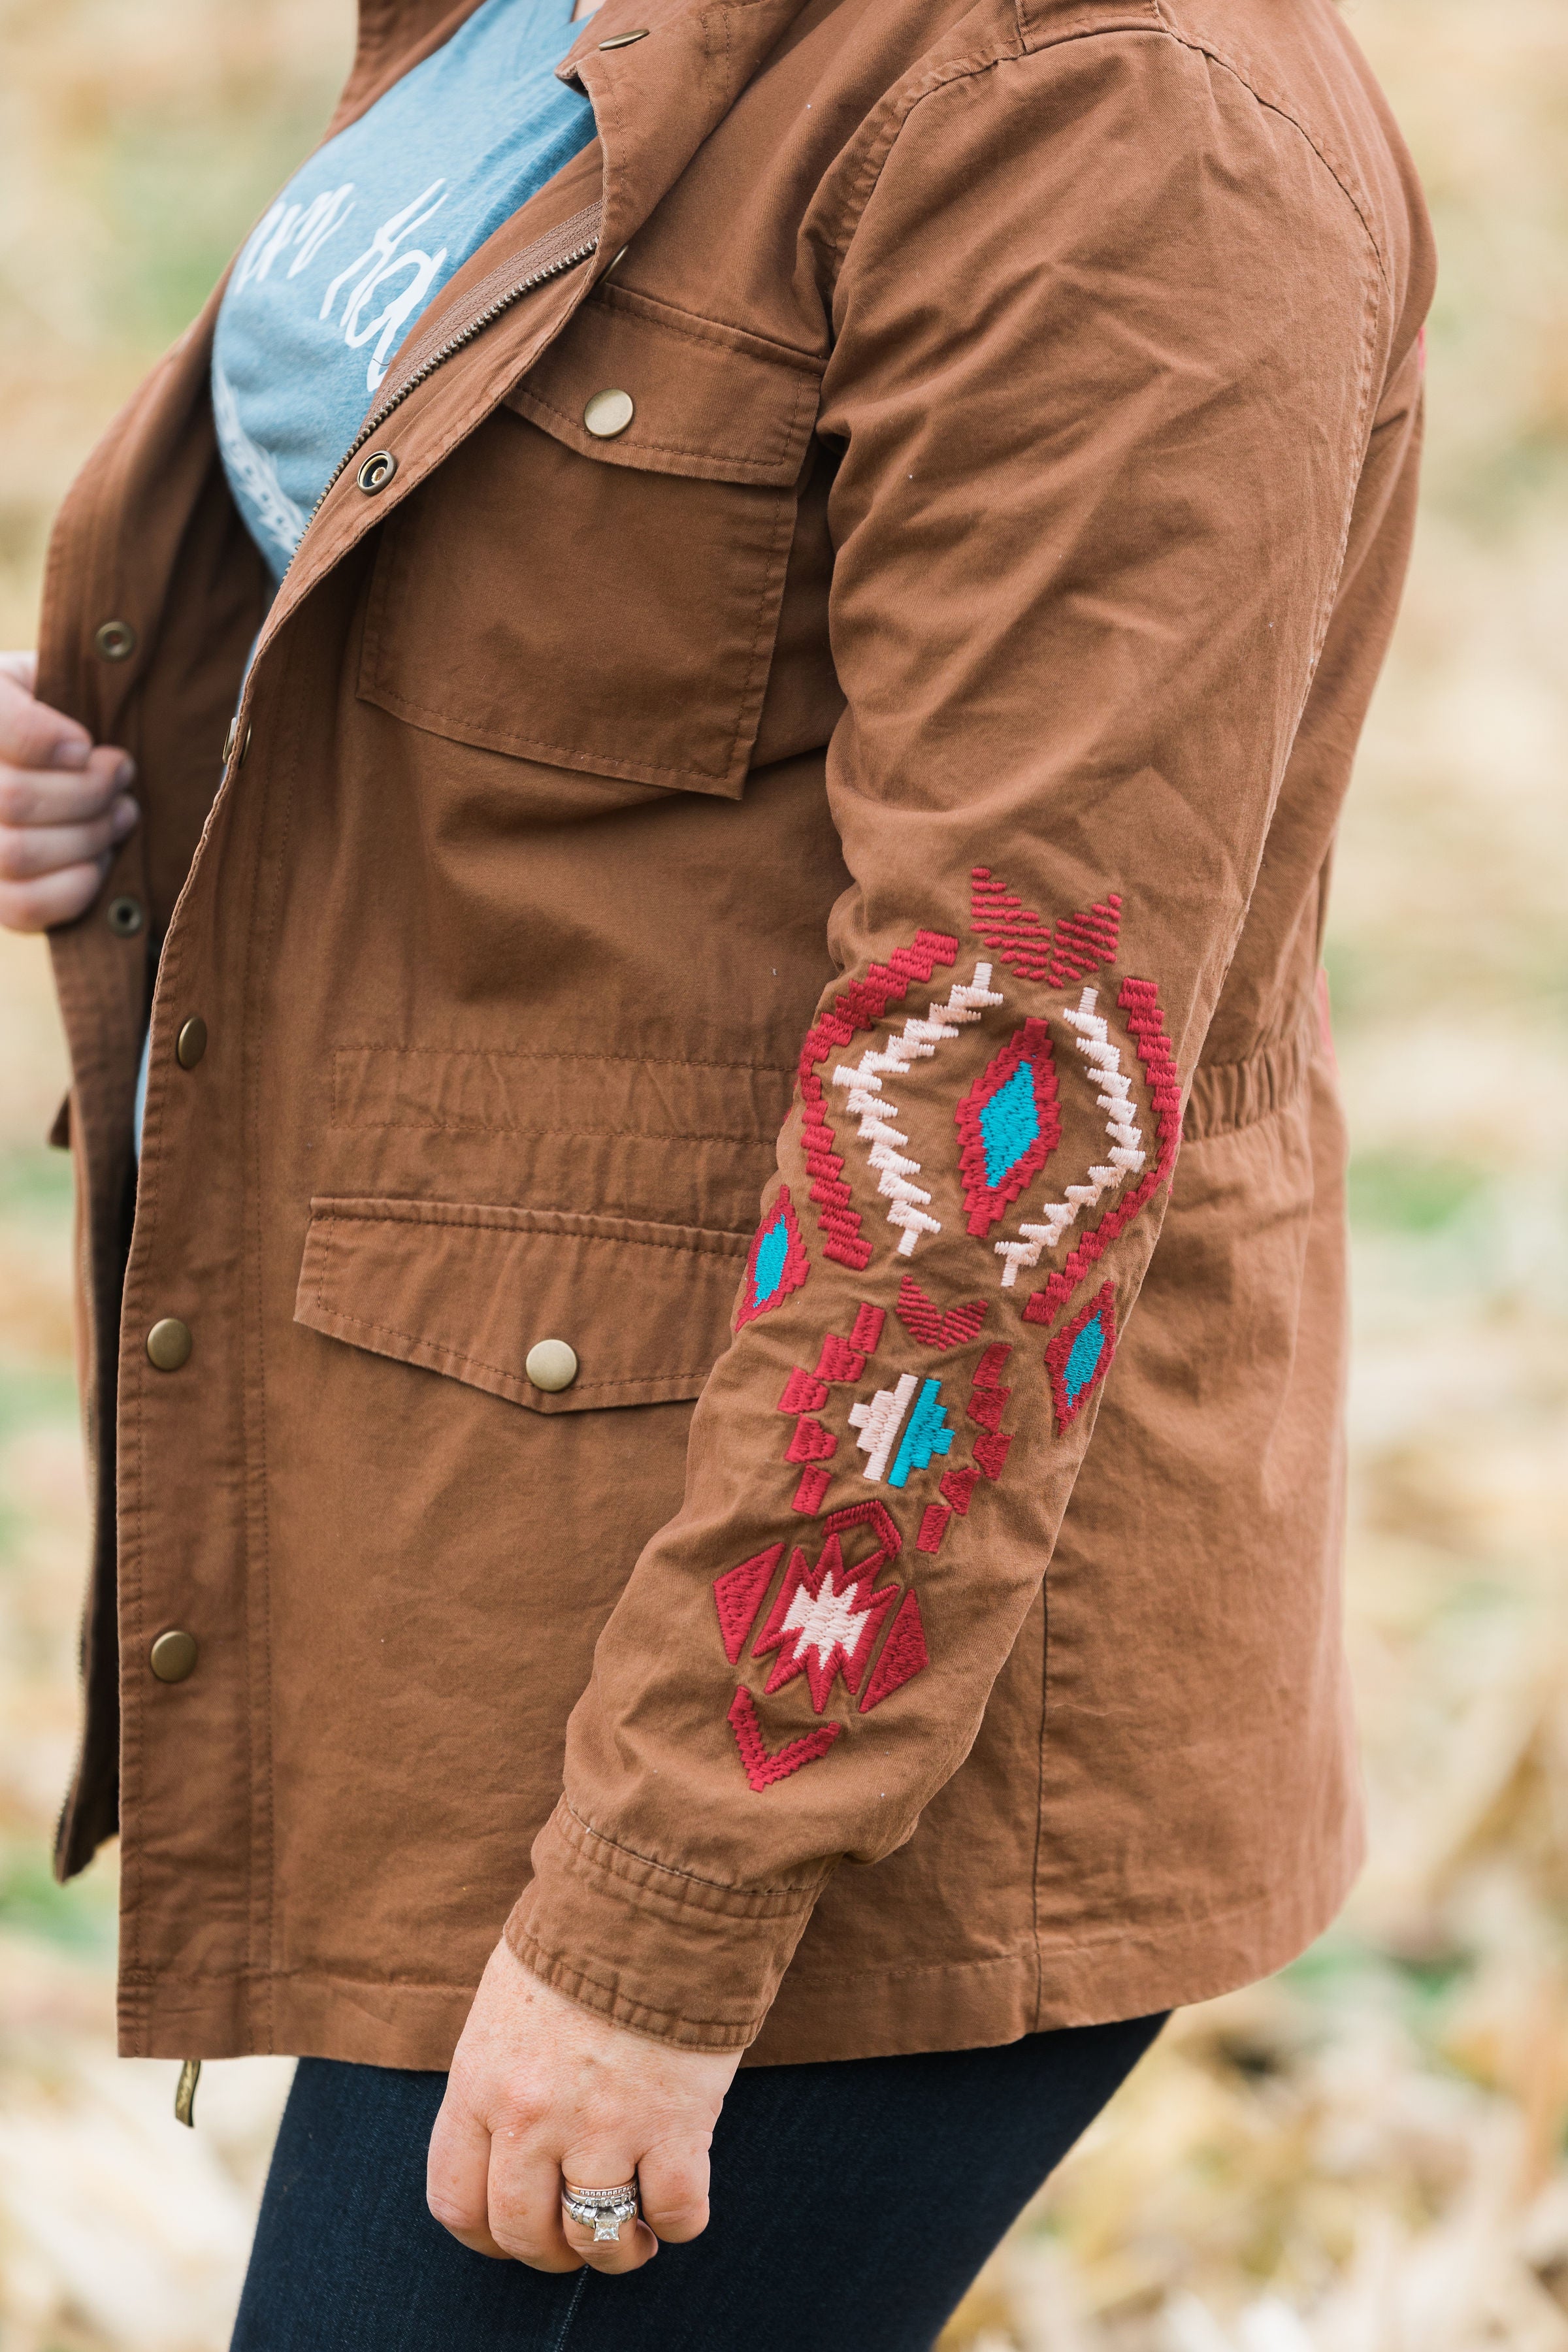 Southwest Embroidered Zip-Up Jacket in Tan | Sizes Small-2XL